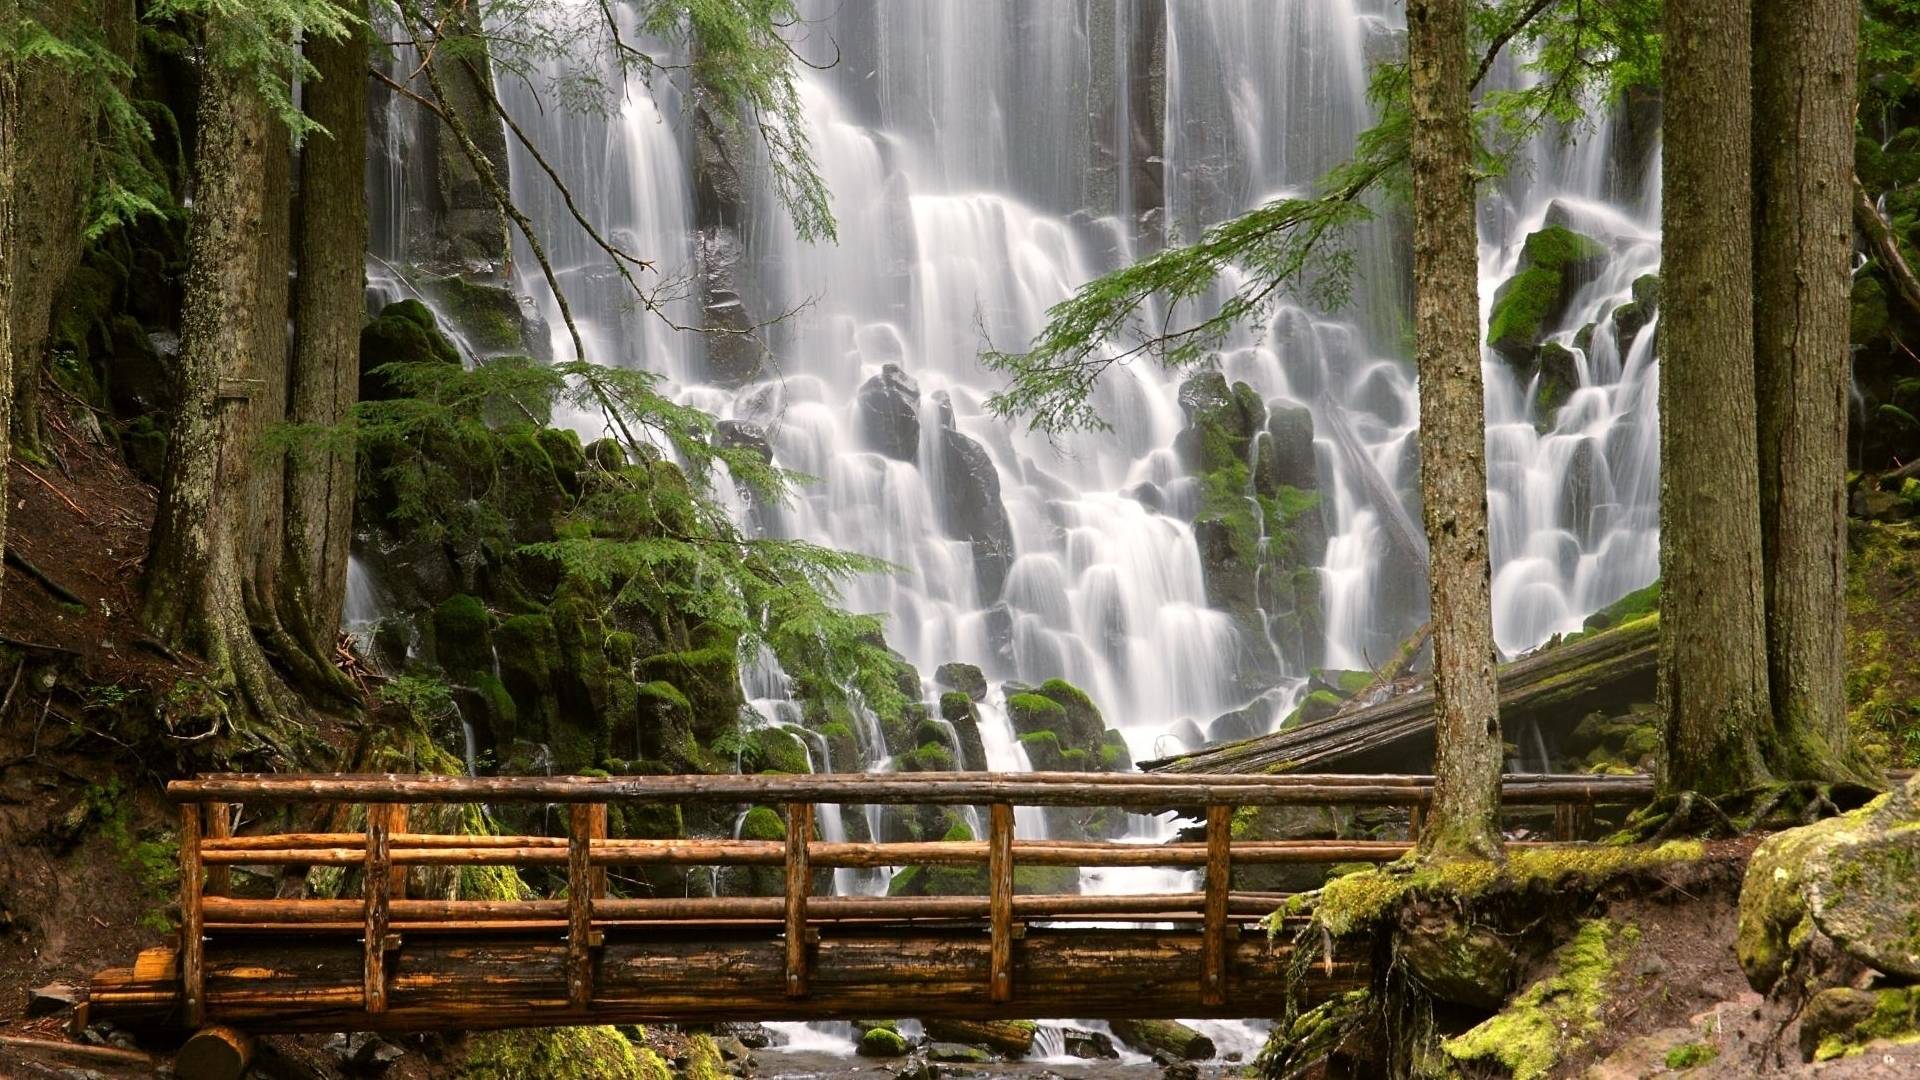 Download 6886729 Forest Waterfall Wallpaper. Make FB Cover Photo